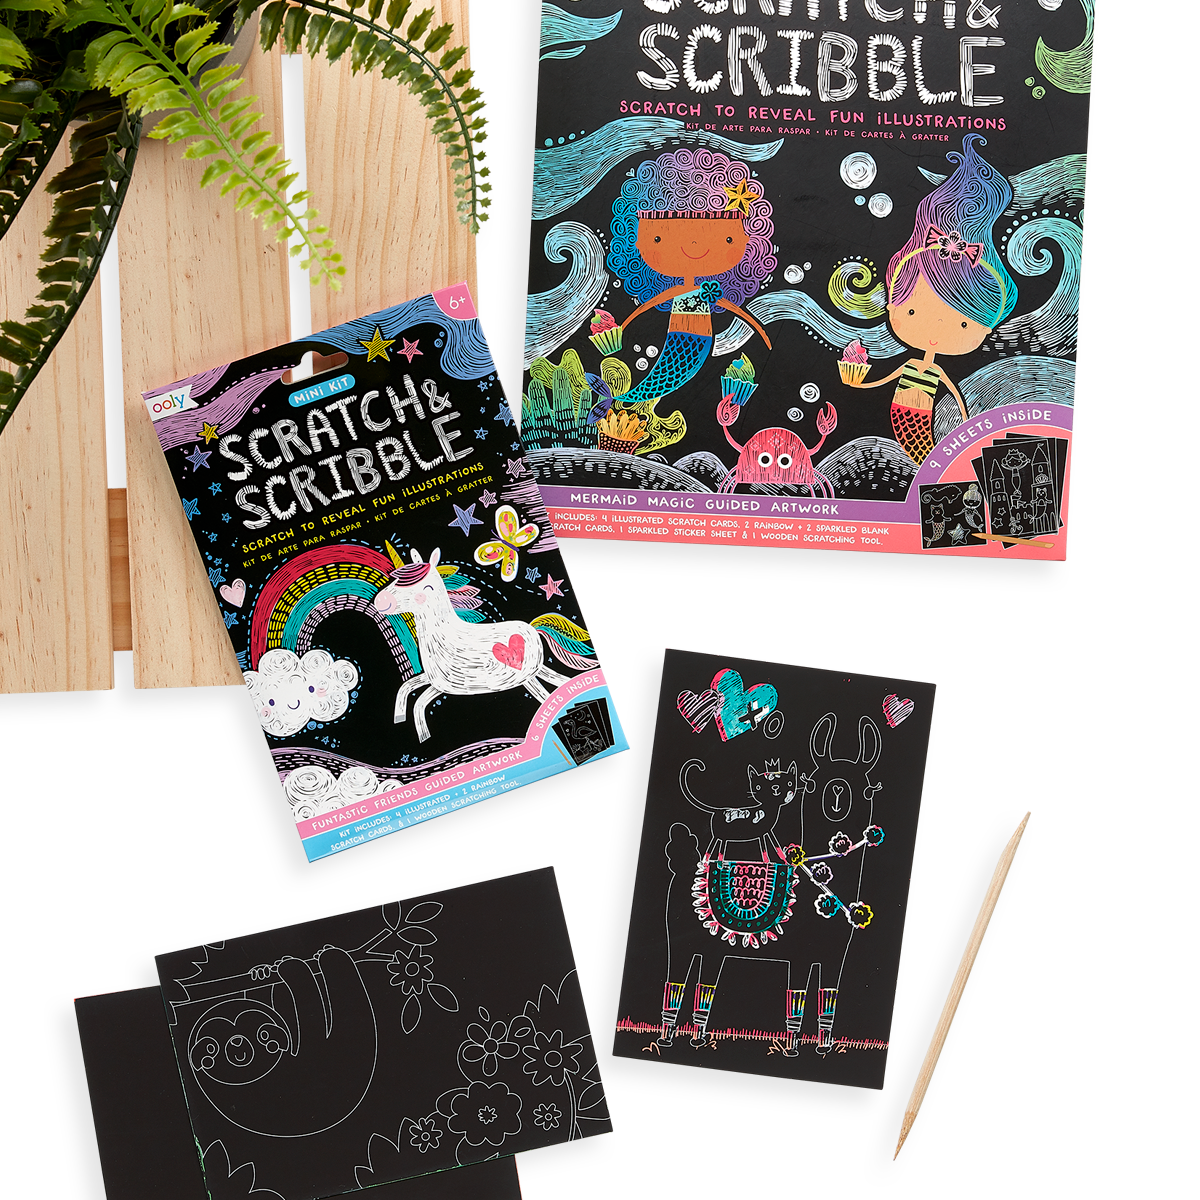 Display of Funtastic Friends Scratch and Scribble Mini Scratch Art Kit next to the Mermaid Magic Scratch and Scribble. 